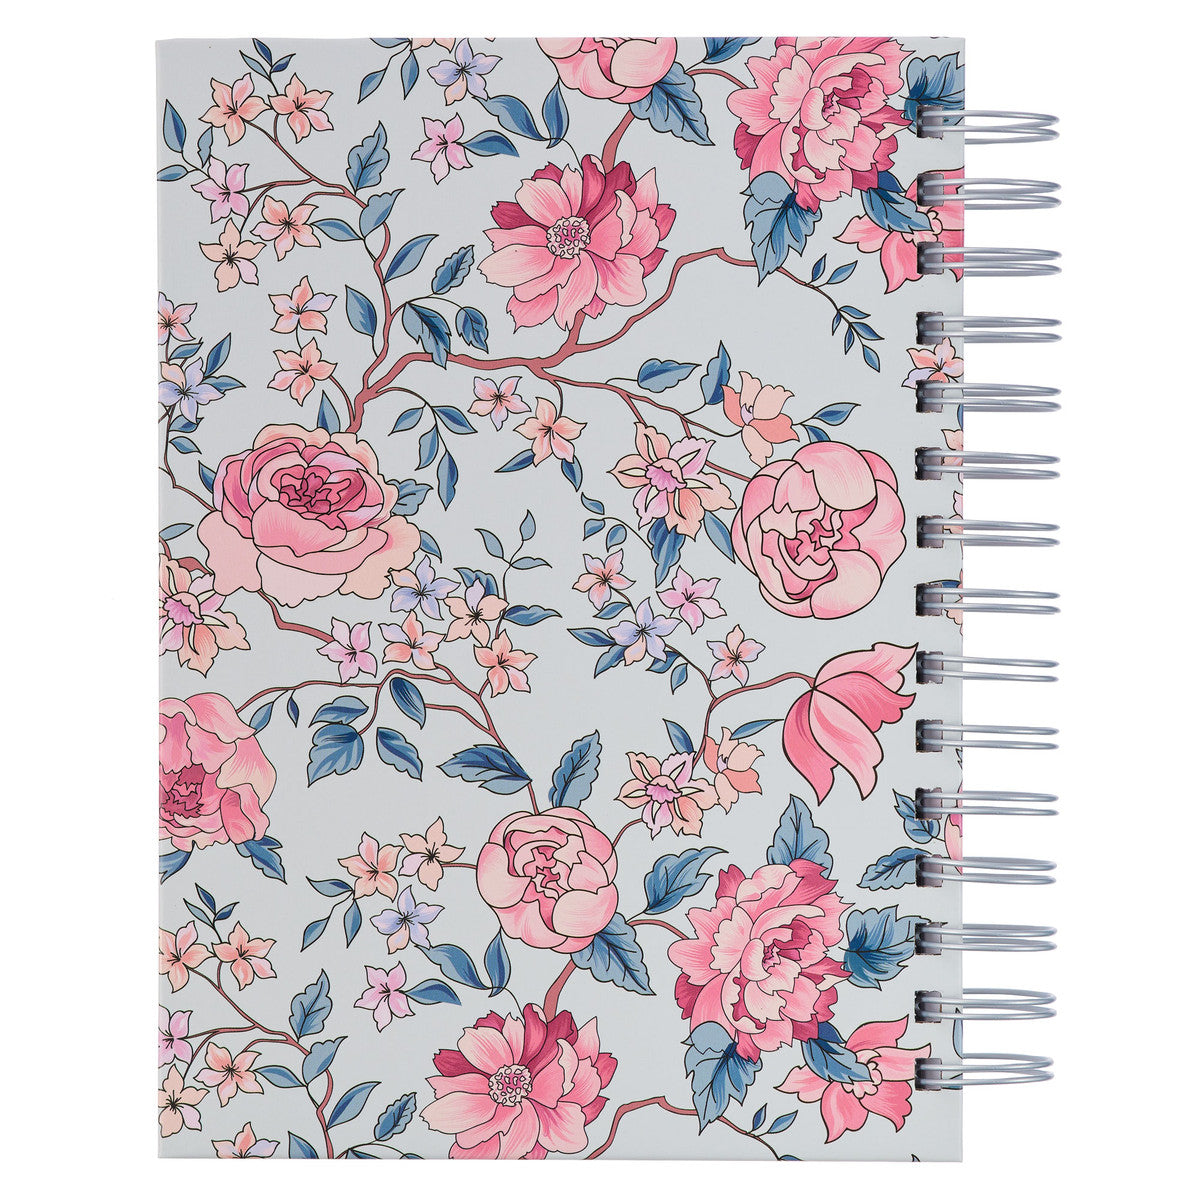 More Precious Than Rubies Pink Floral Wirebound Journal - Proverbs 5:13